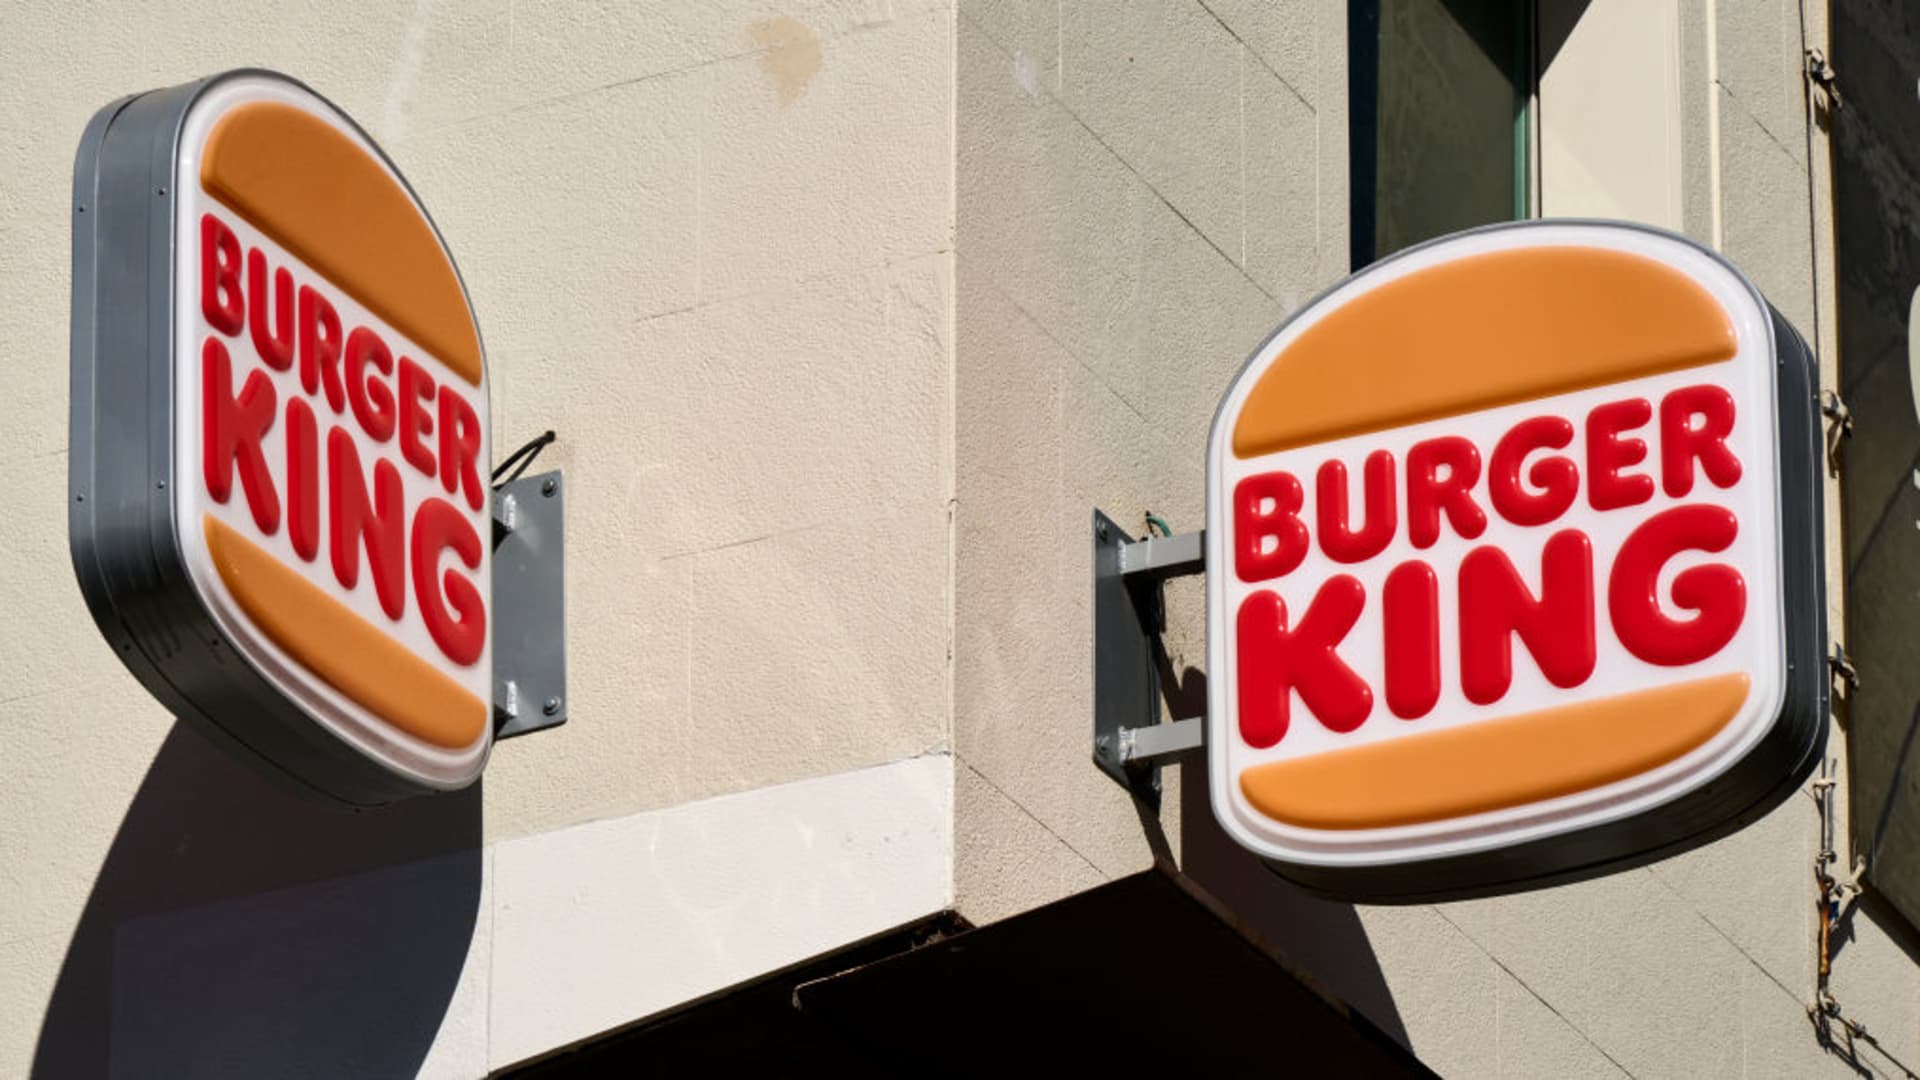 Burger King 0 million plans to revive sales in the US with remodeling and advertising